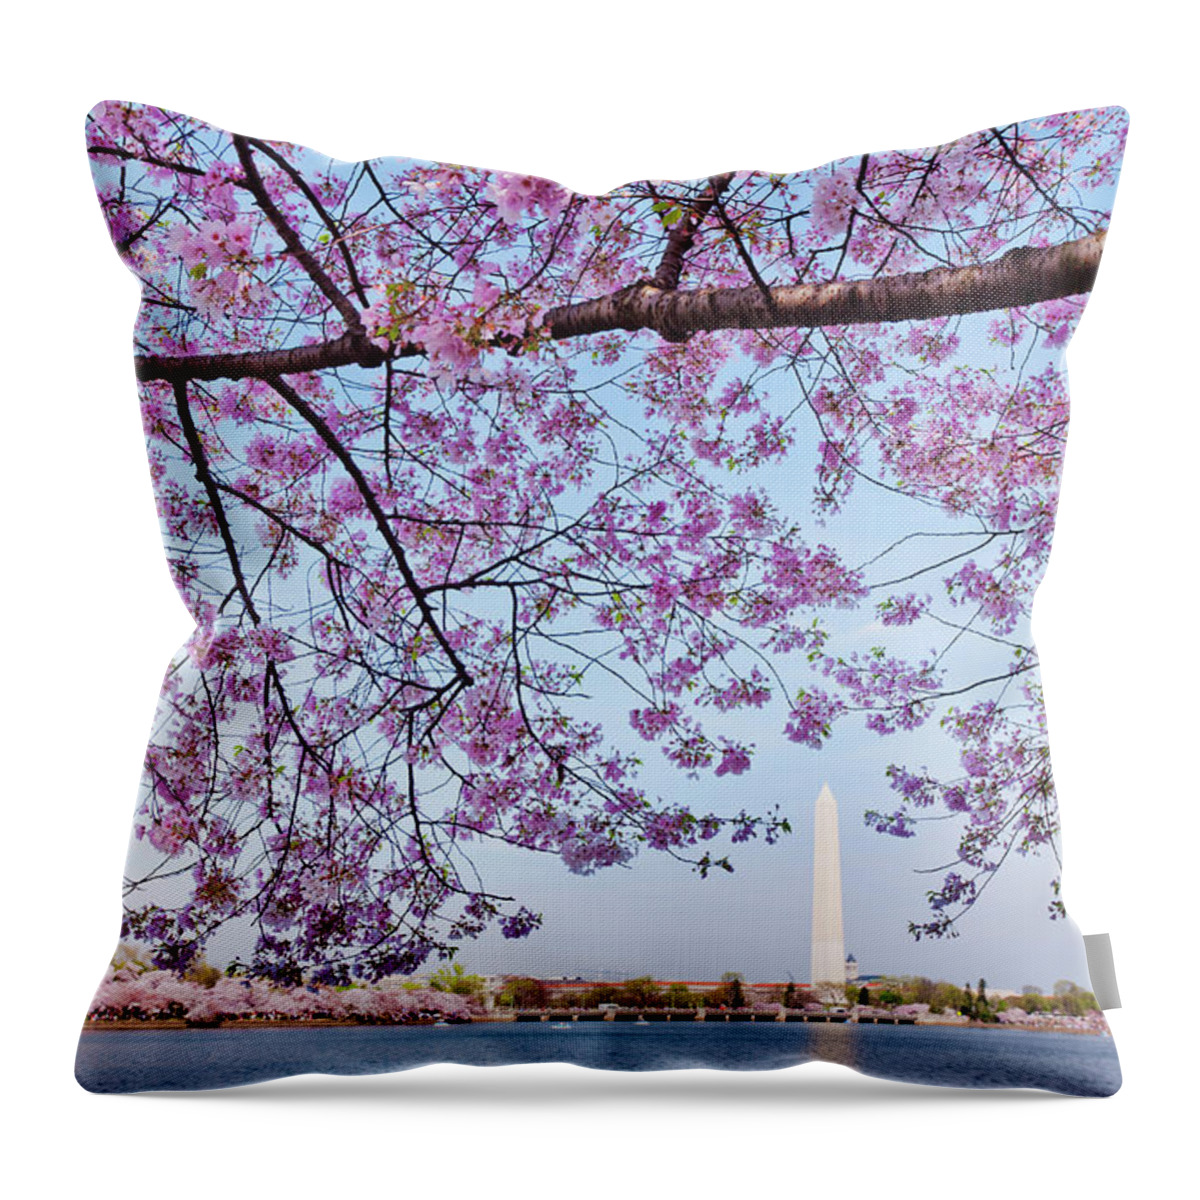 Scenics Throw Pillow featuring the photograph Usa, Washington Dc, Cherry Tree In by Tetra Images